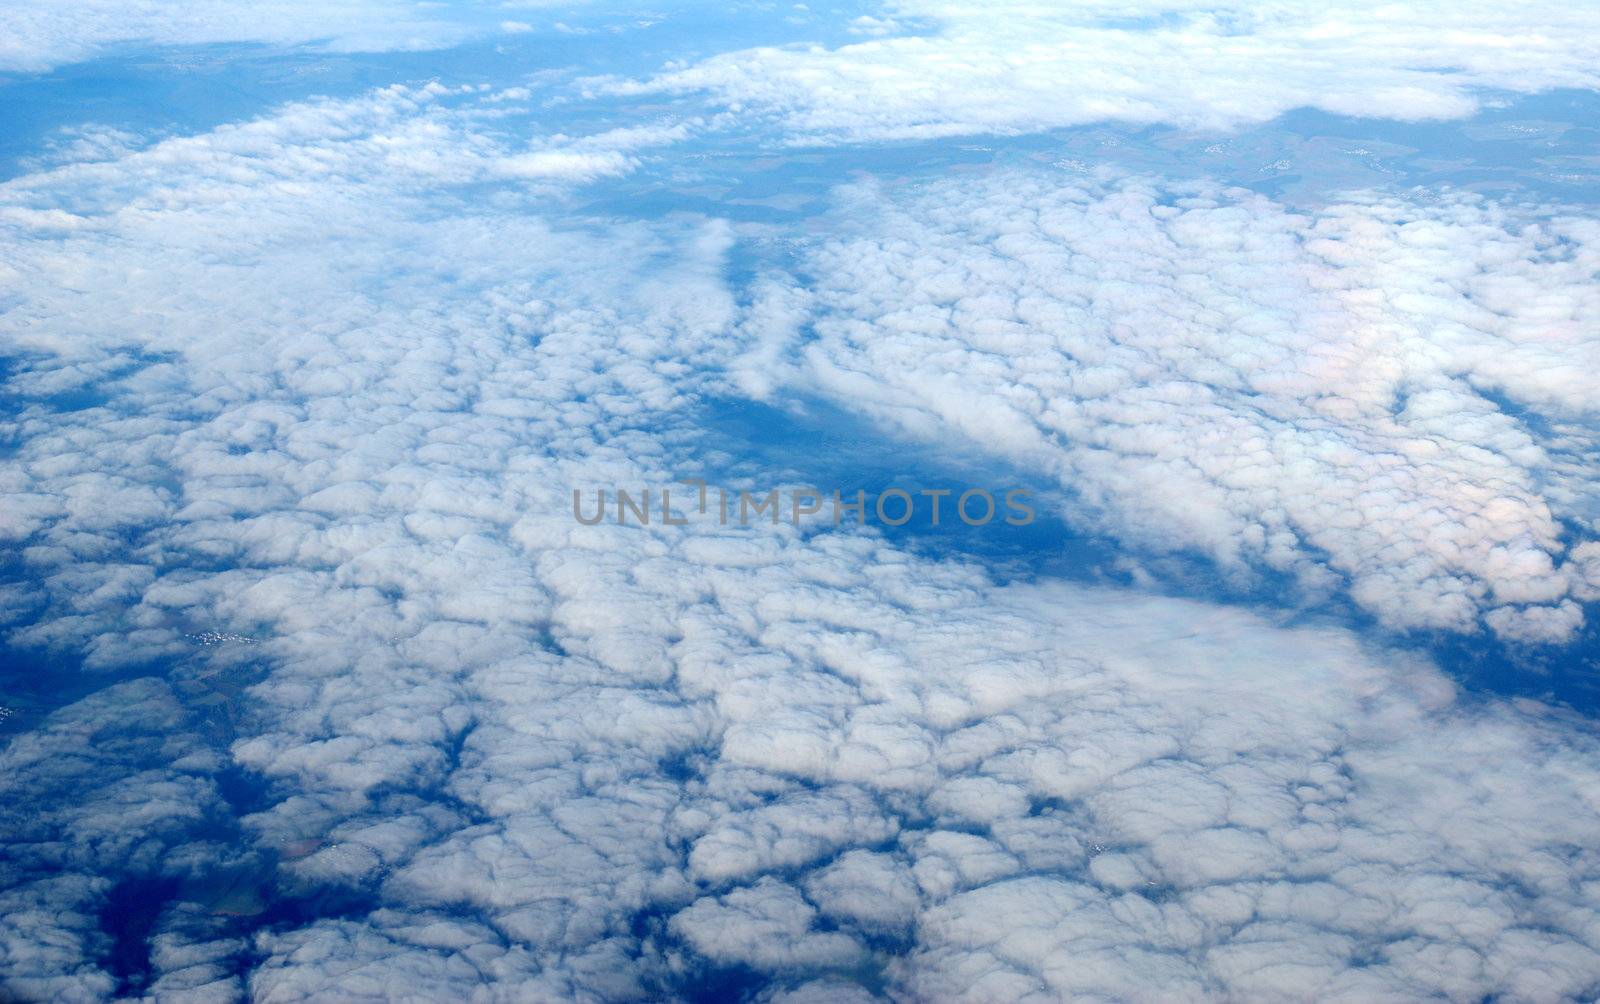 Cloud layer from above